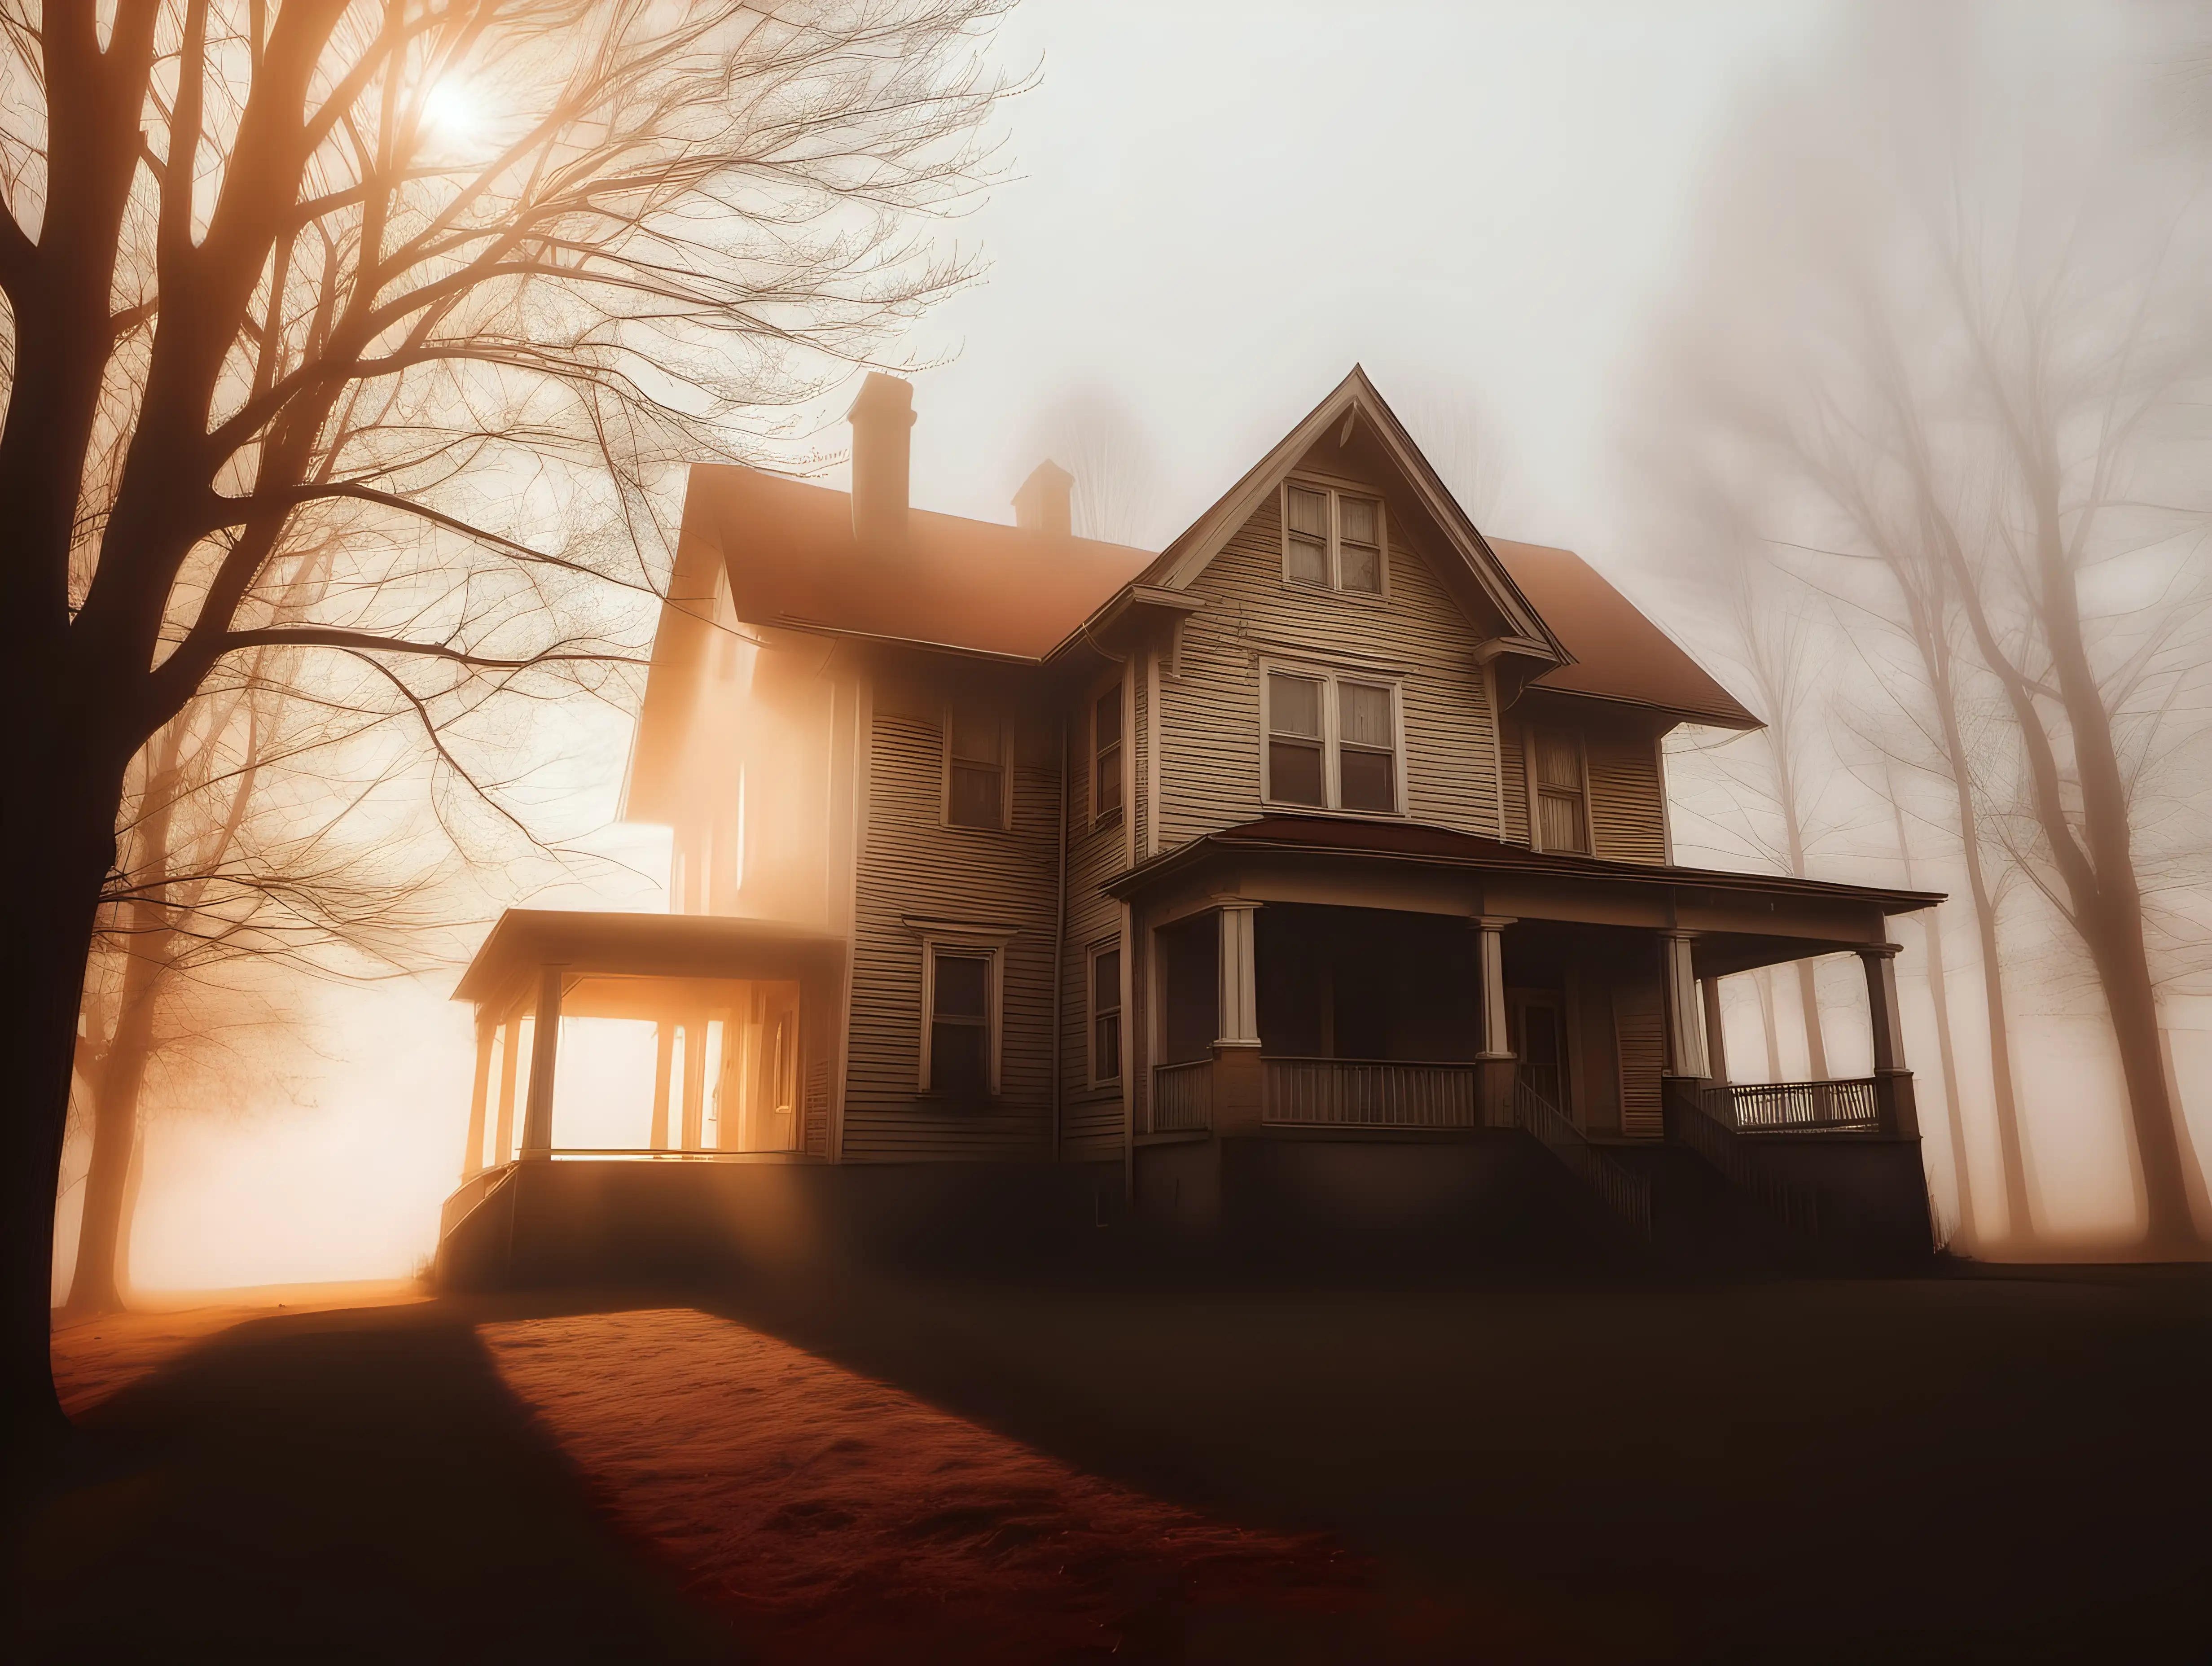 Enchanting House in the Fog Bathed in Warm Sunlight